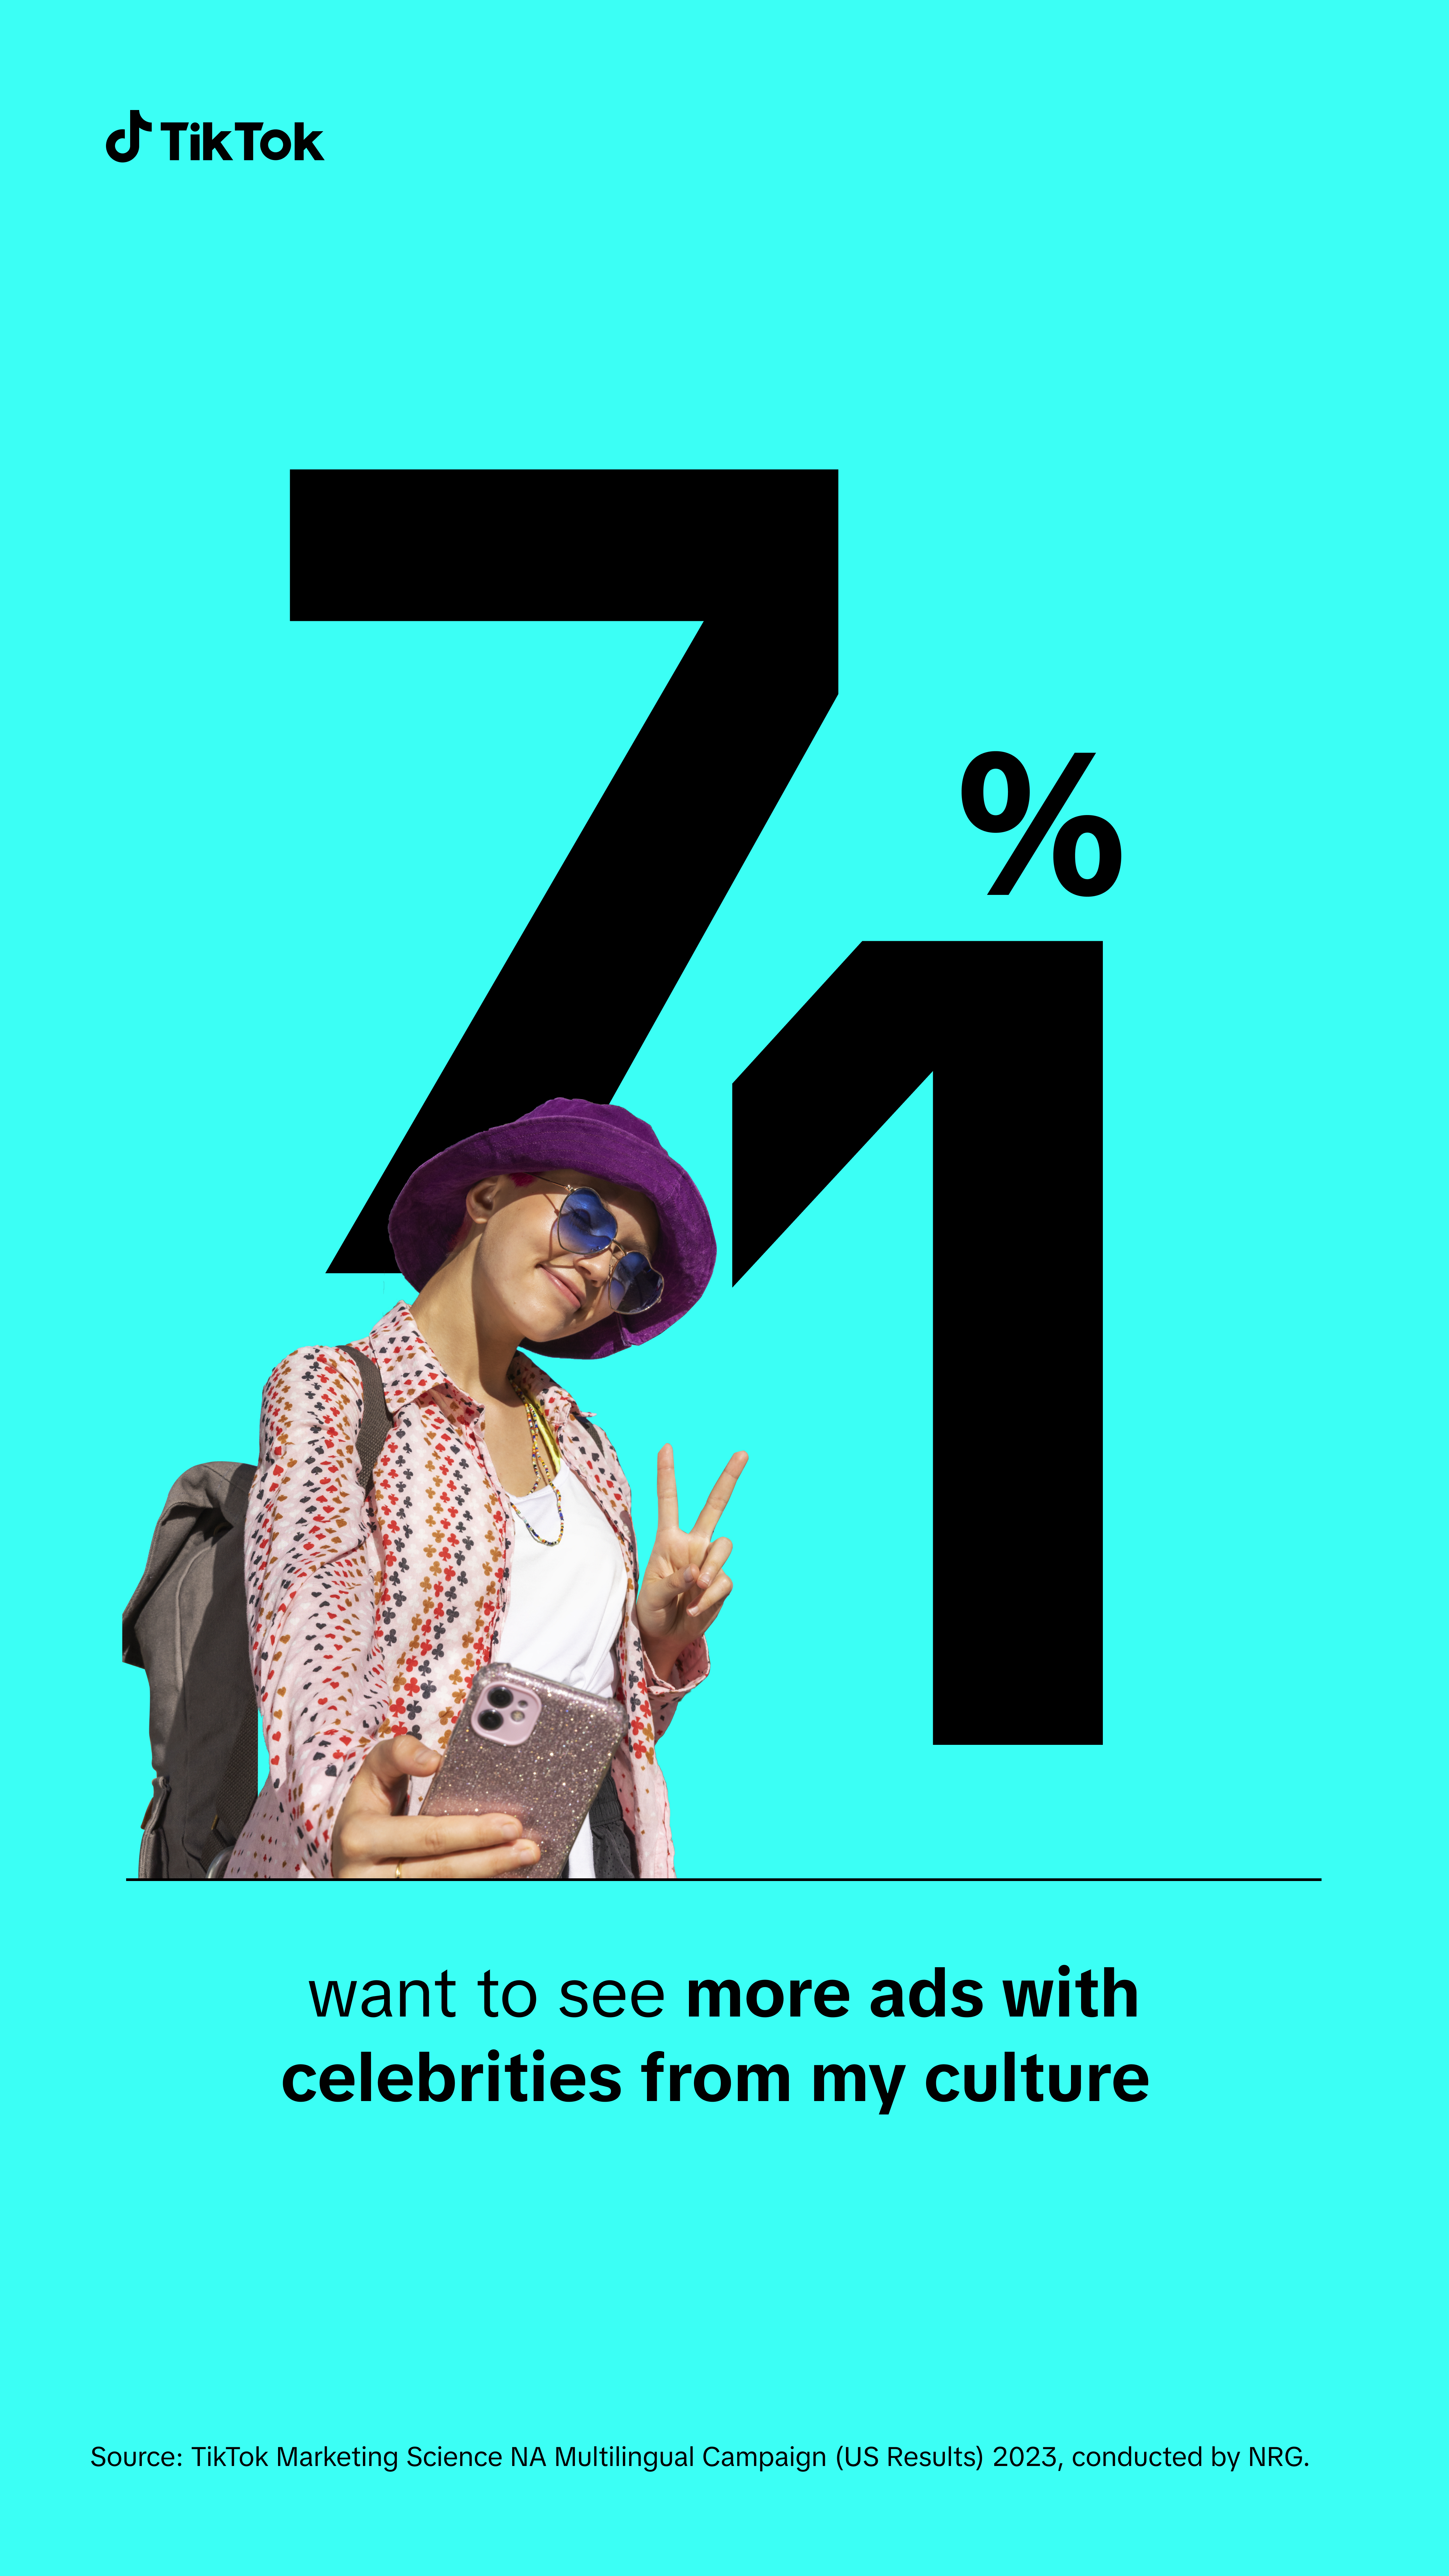 71% of bilingual users want to see more ads with celebrities from their culture